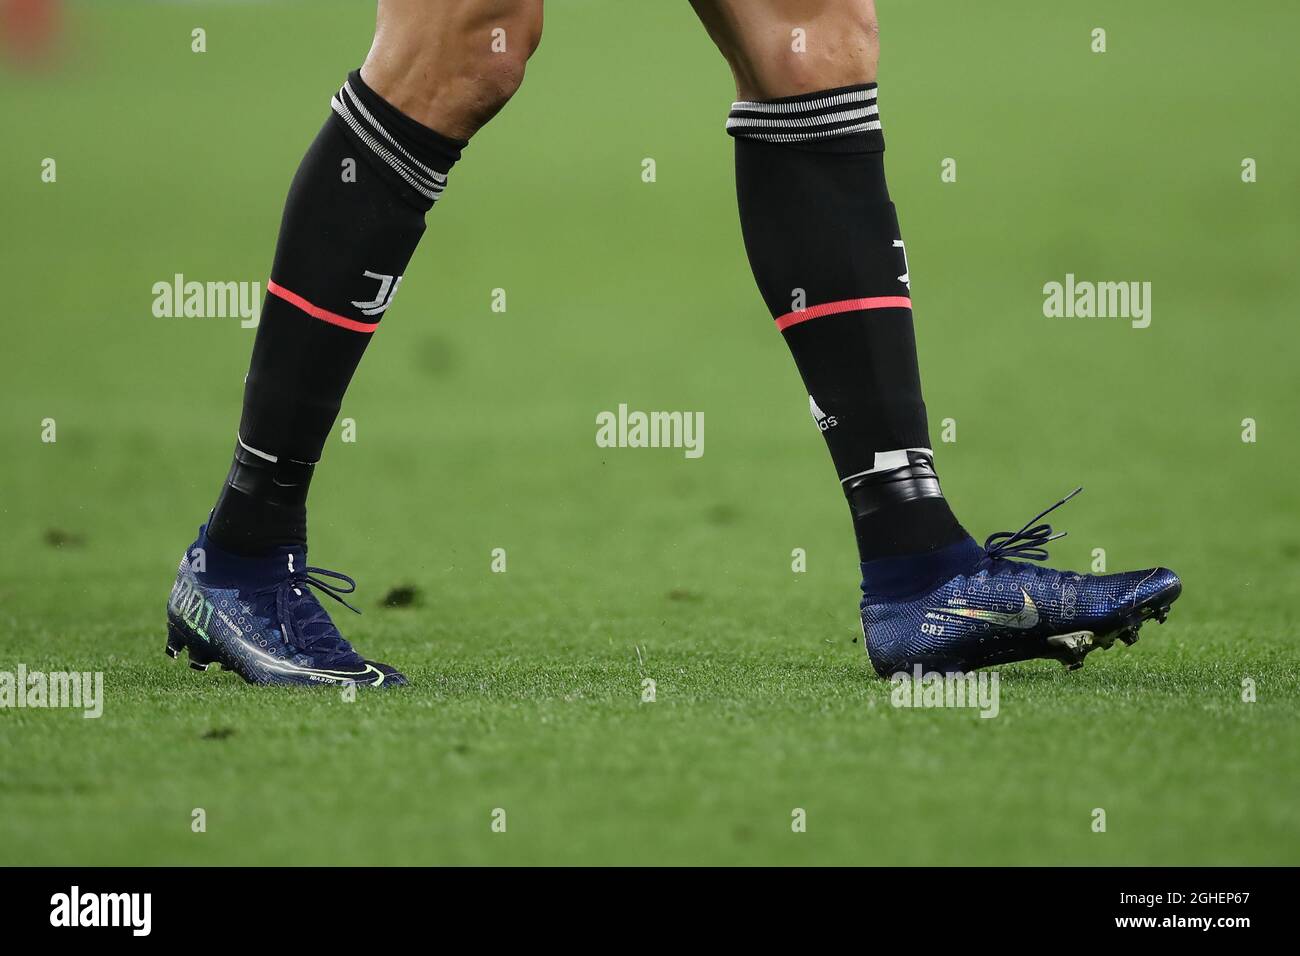 Cristiano Ronaldo of Juventus models a new version of the Nike Mercurial  football boots during the UEFA Champions League match at Juventus Stadium,  Turin. Picture date: 1st October 2019. Picture credit should